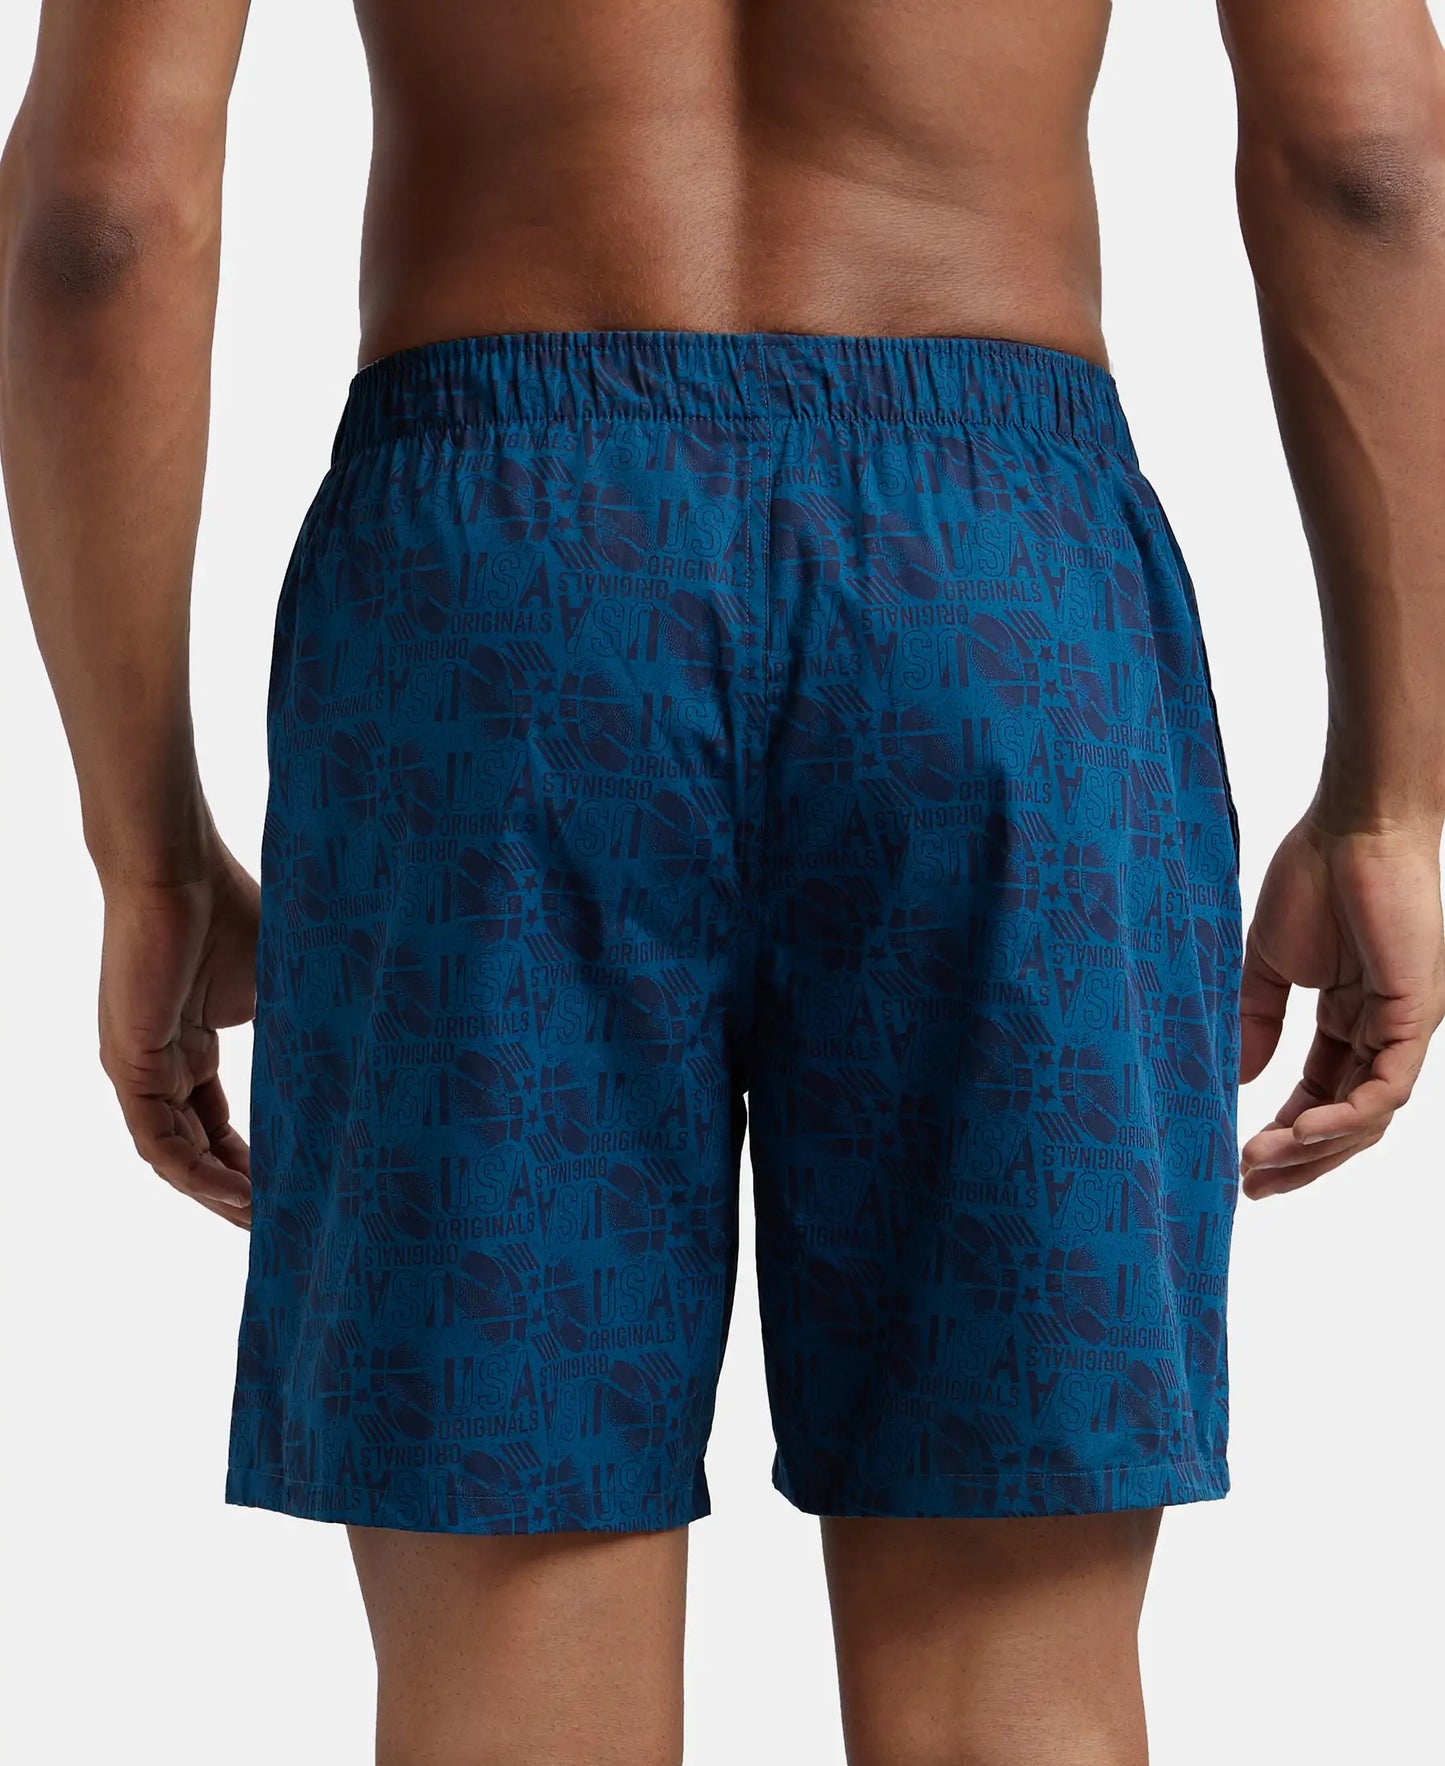 Super Combed Mercerized Cotton Woven Printed Boxer Shorts with Side Pocket - Navy Seaport Teal-6